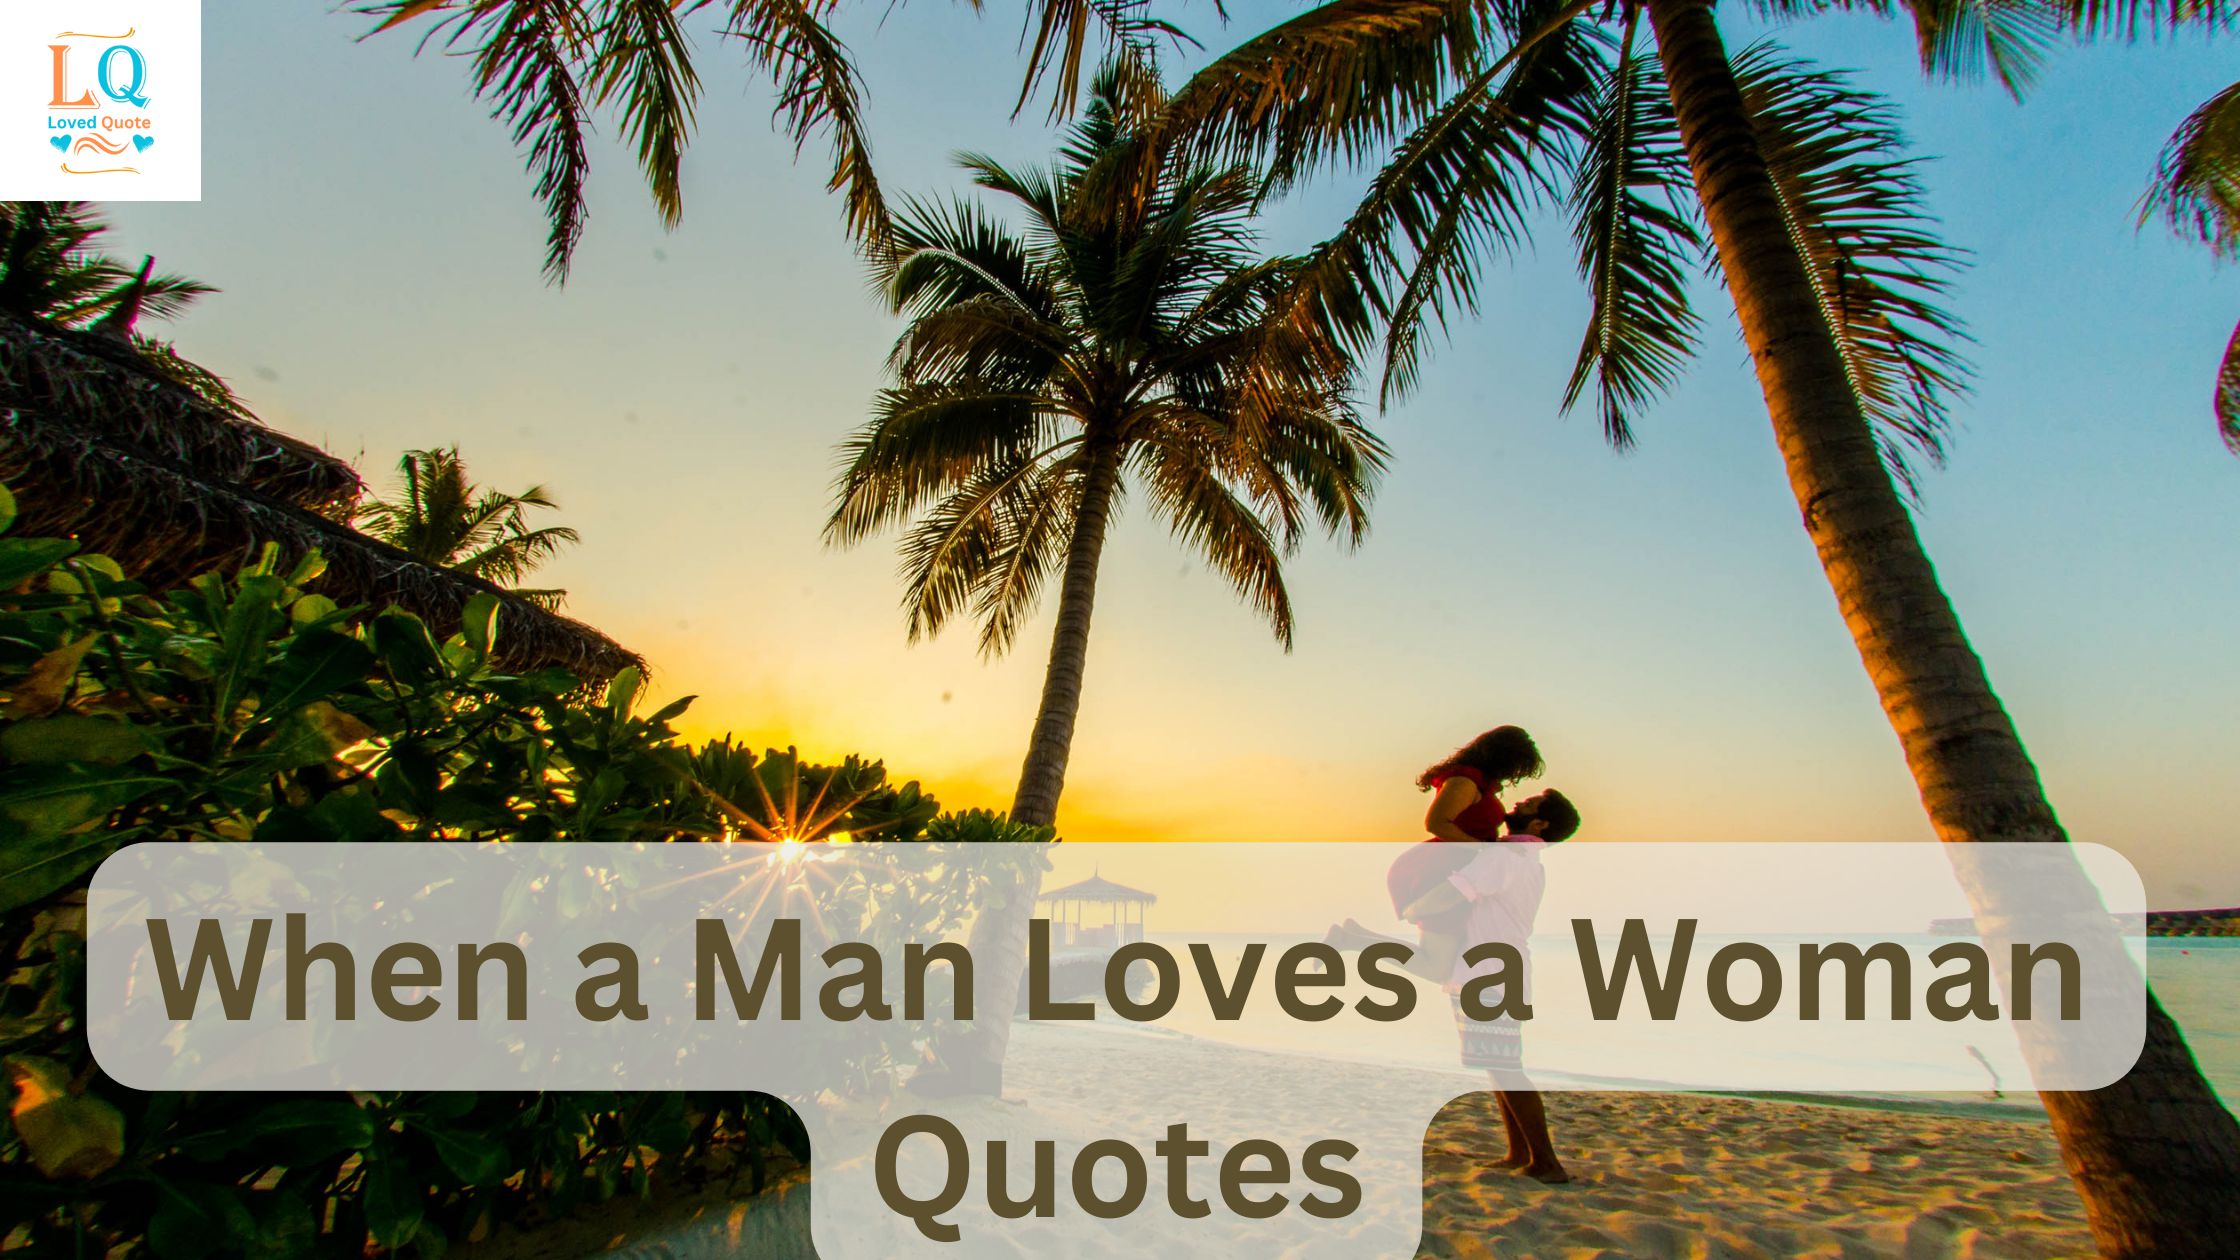 When a Man Loves a Woman Quotes (1)